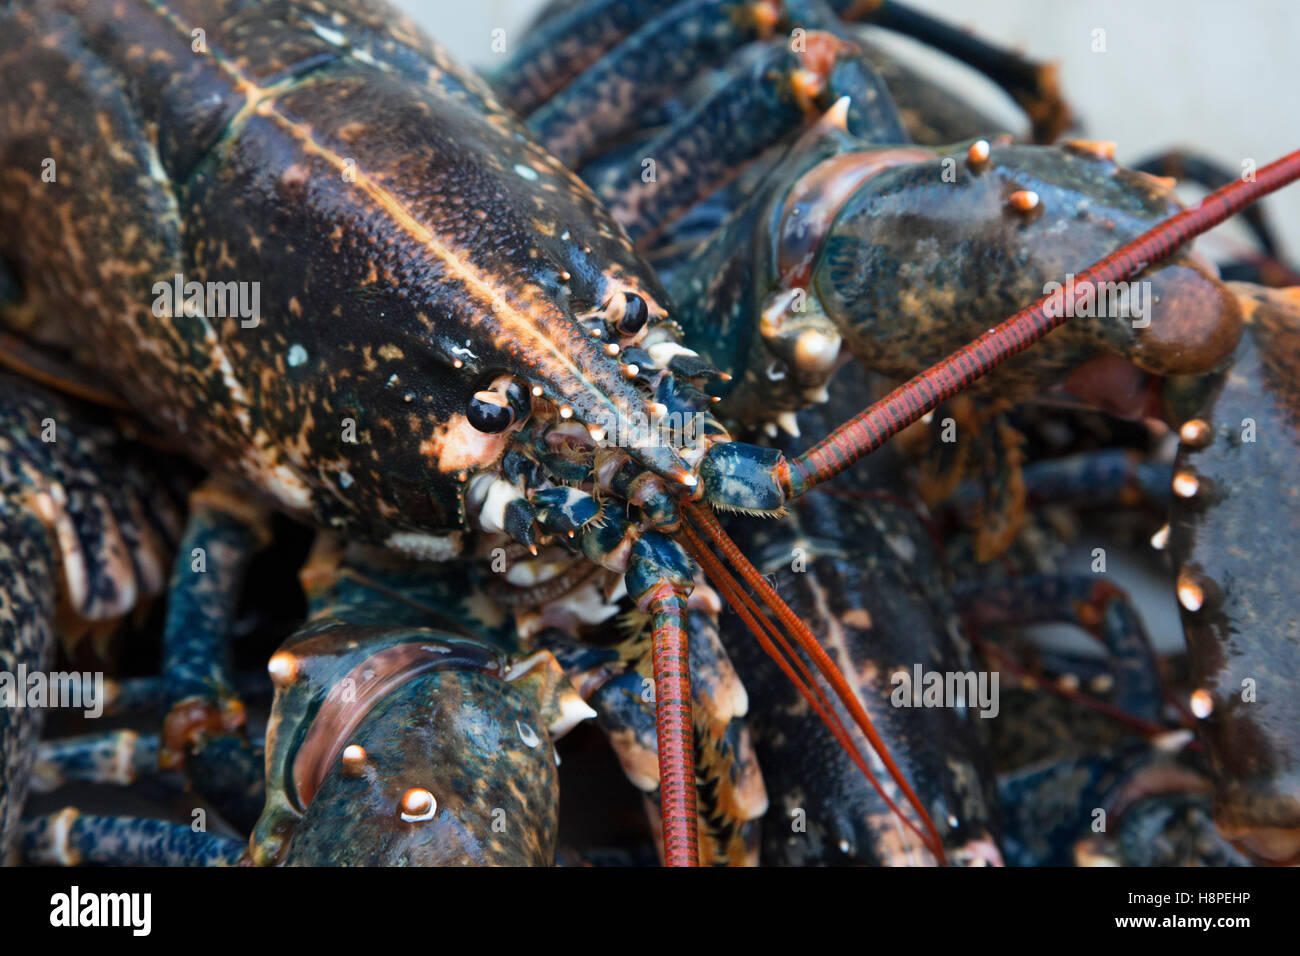 Fresh lobsters just caught Stock Photo